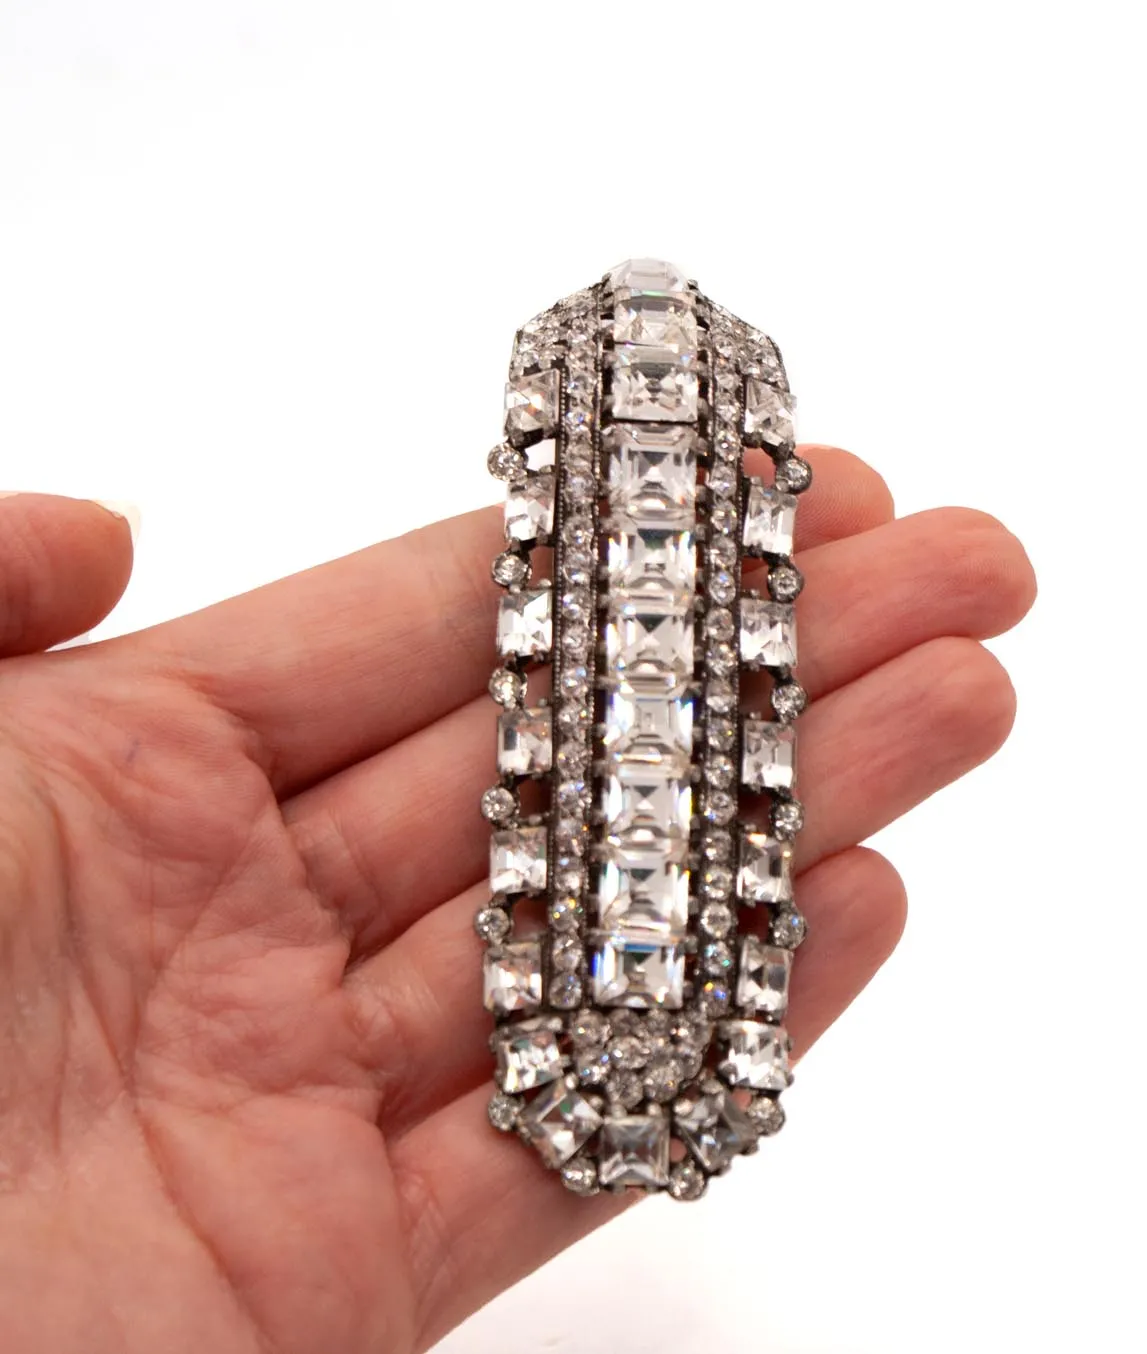 Long crystal dress clip with square and round pastes held in a hand